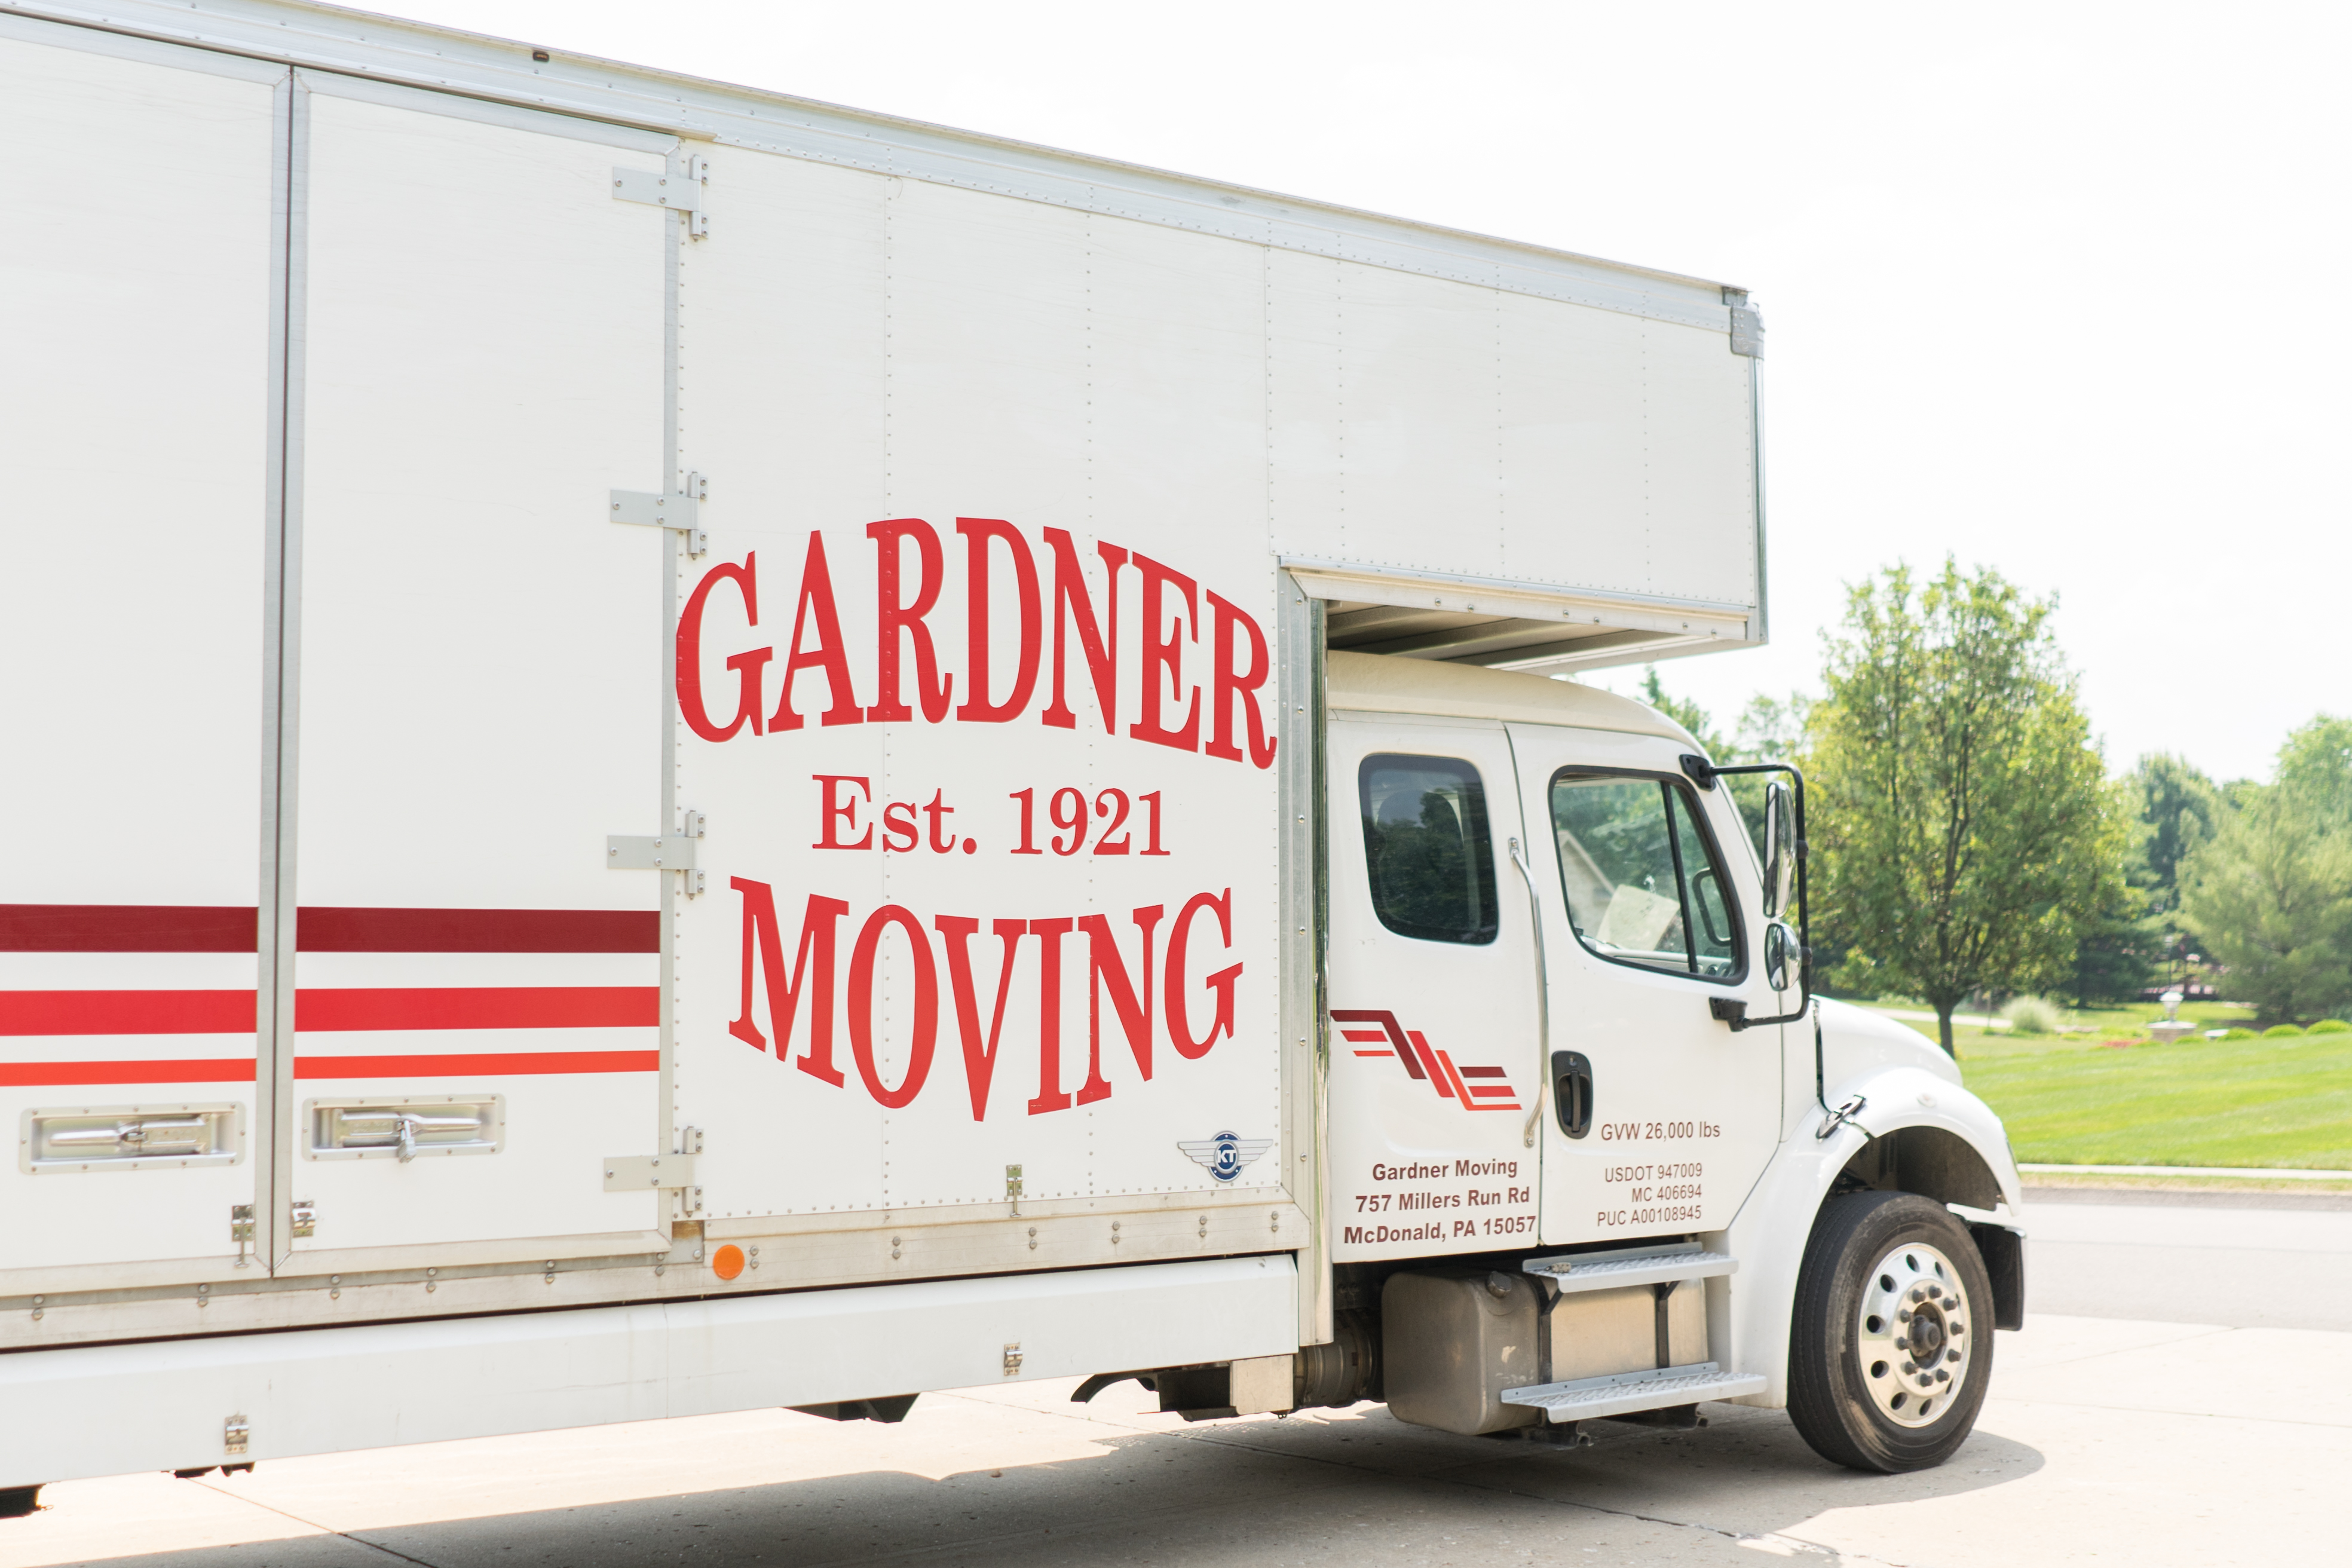 Moving Companies Pittsburgh Pa \/ Between the scenic river views, iconic ...